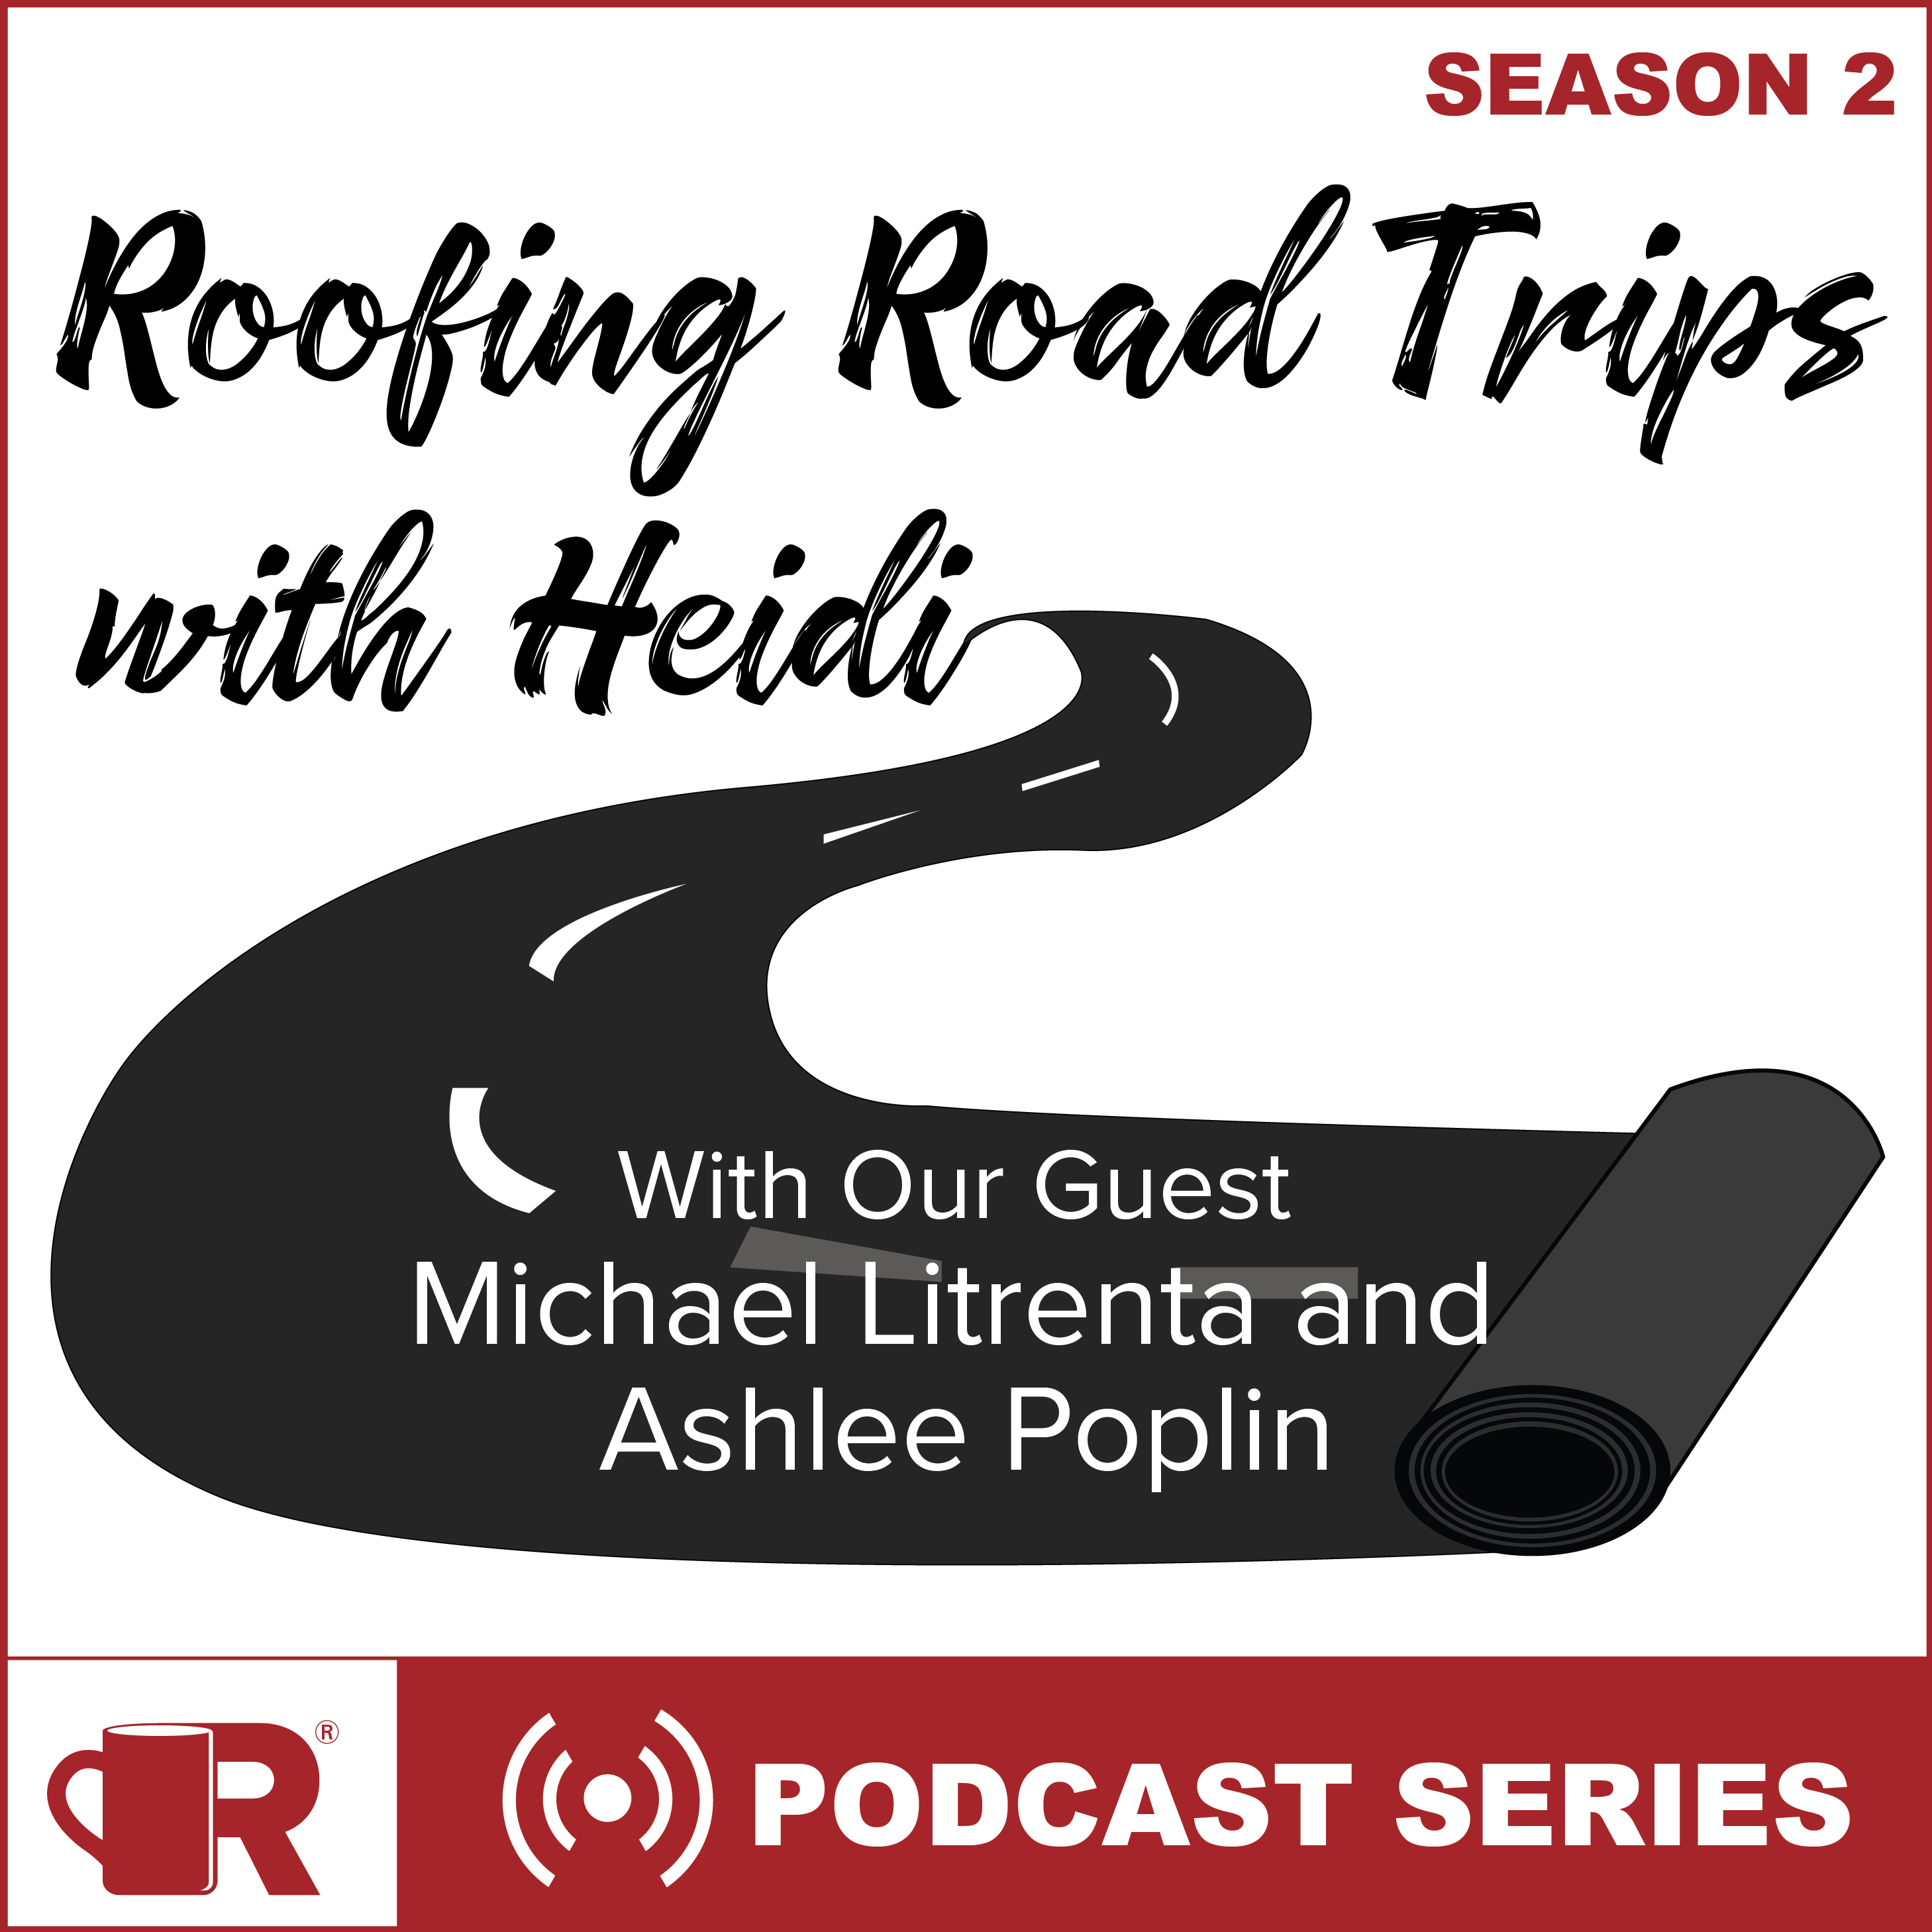 Roofing Road Trips with Heidi podcast with special guests Michael Litrenta and Ashlee Poplin